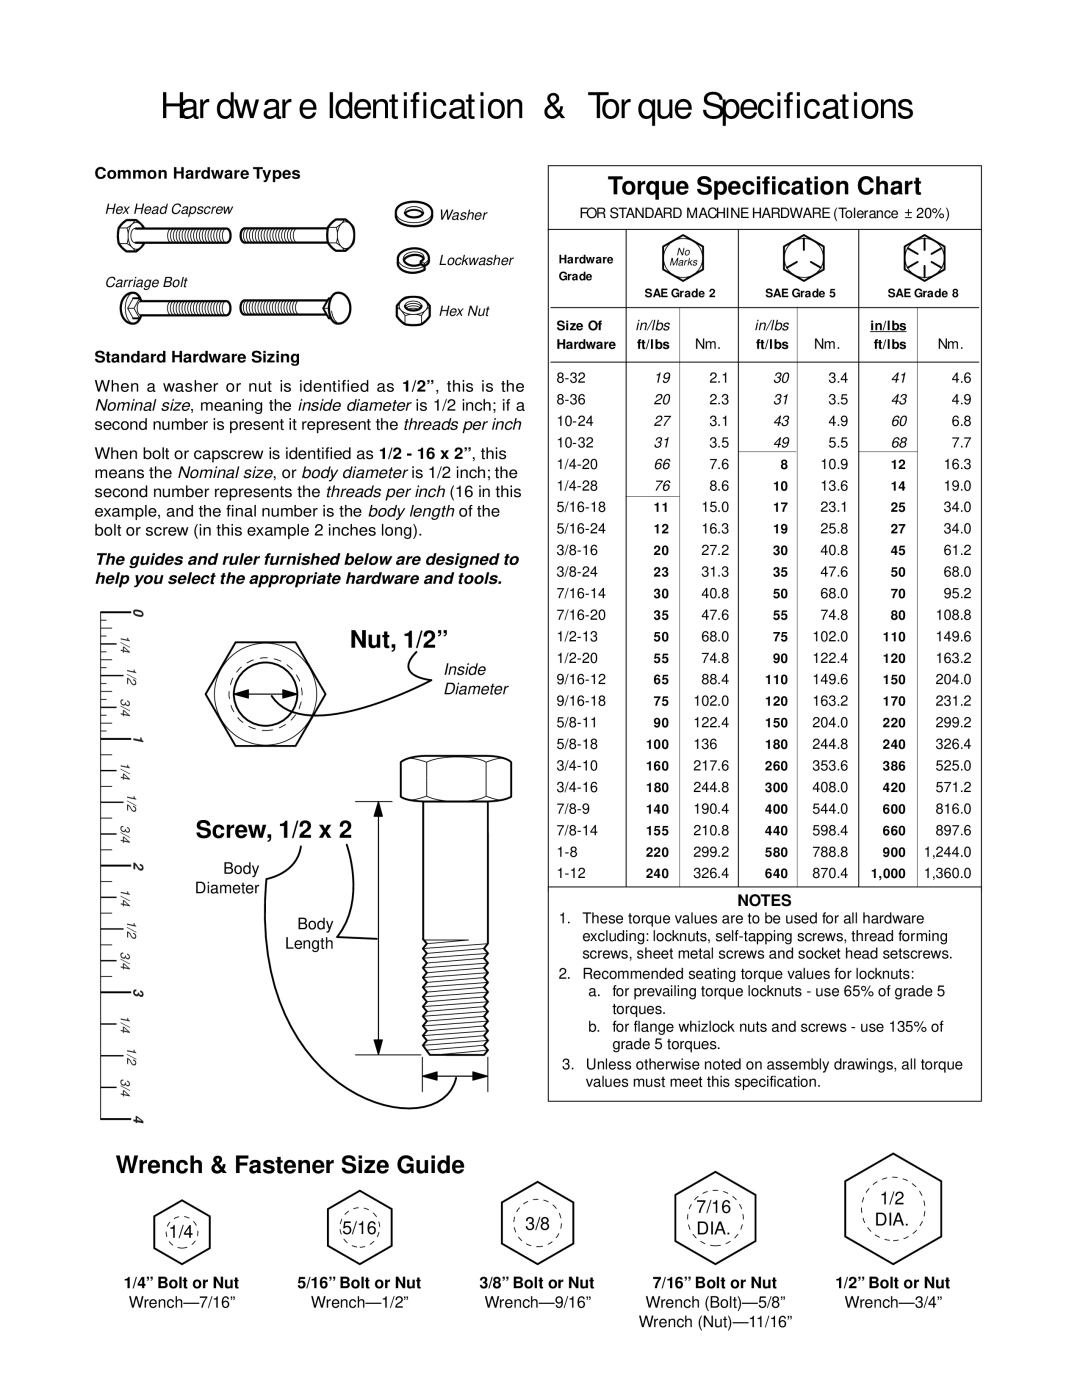 Briggs & Stratton 5901074 Torque Specification Chart, Wrench & Fastener Size Guide, 7/16, 5/16, Nut, 1/2”, Screw, 1/2 